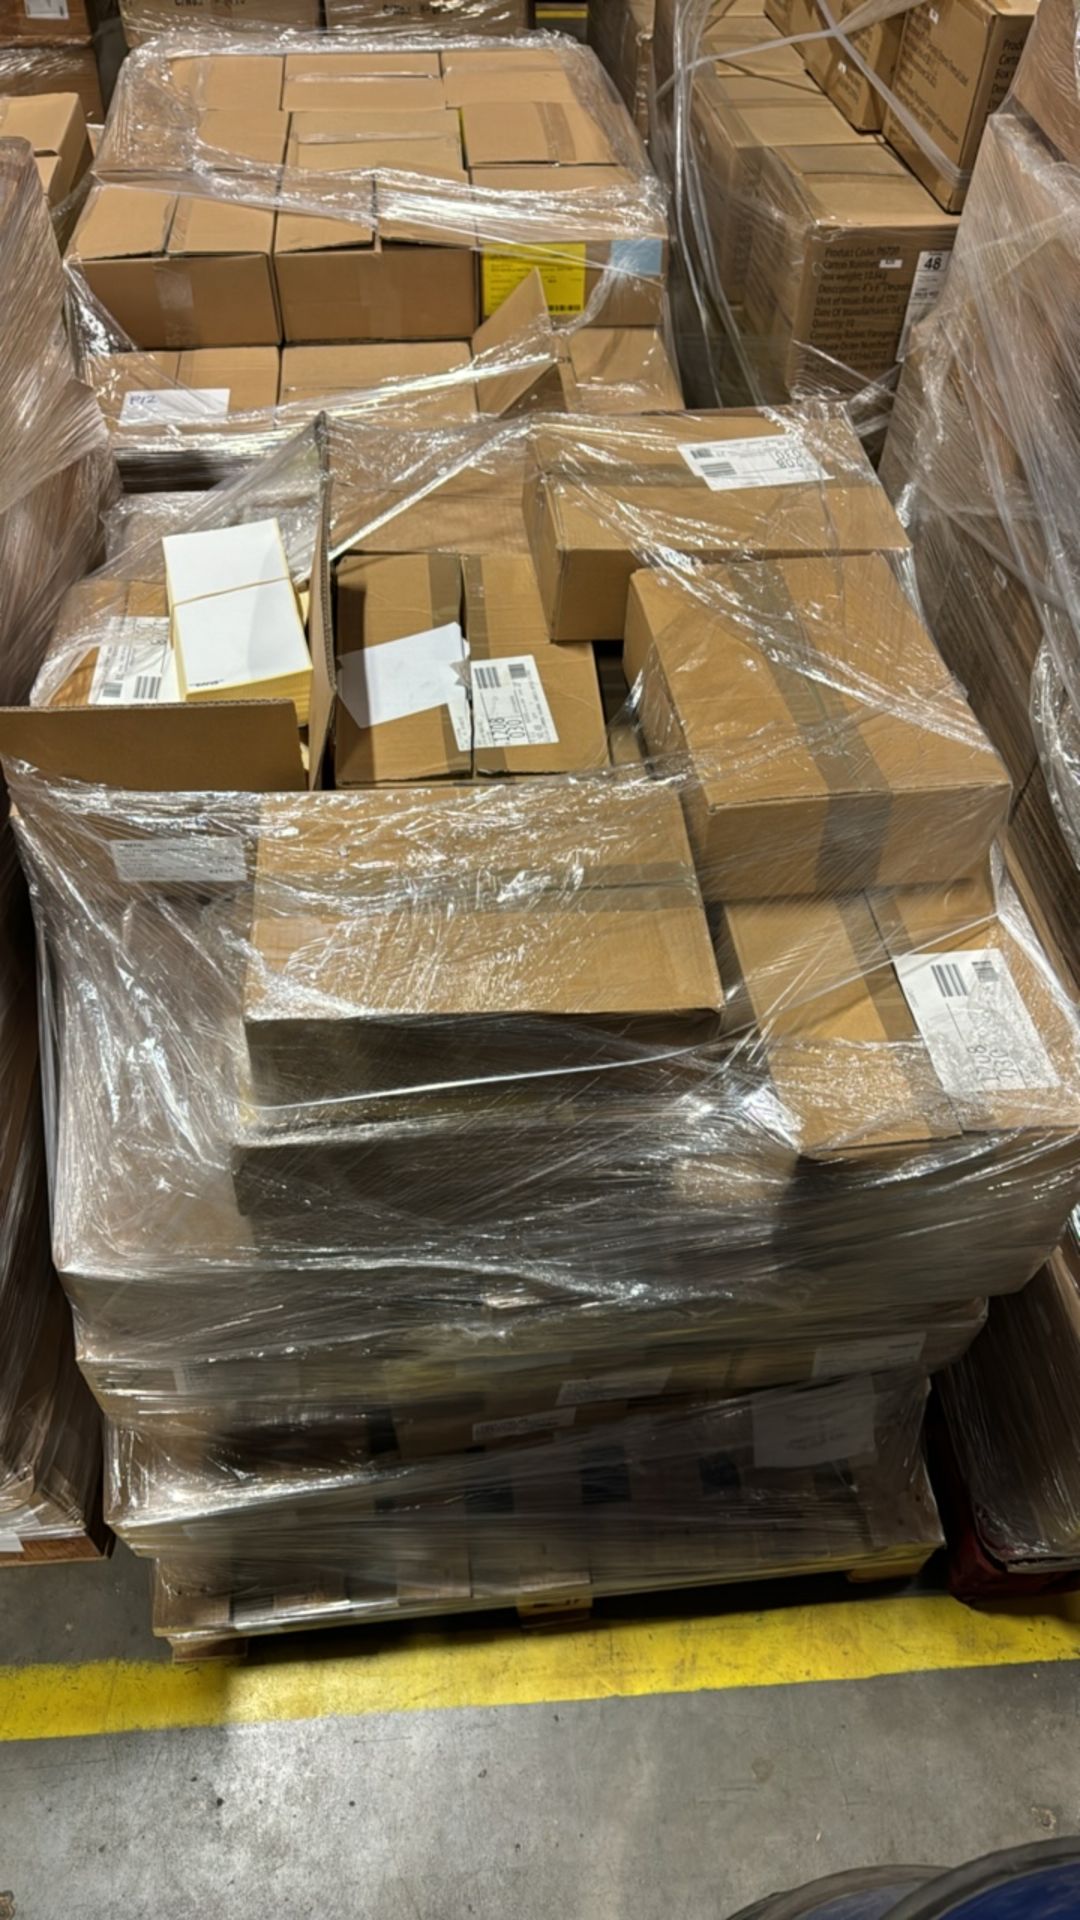 Pallet Of Thermal Labels